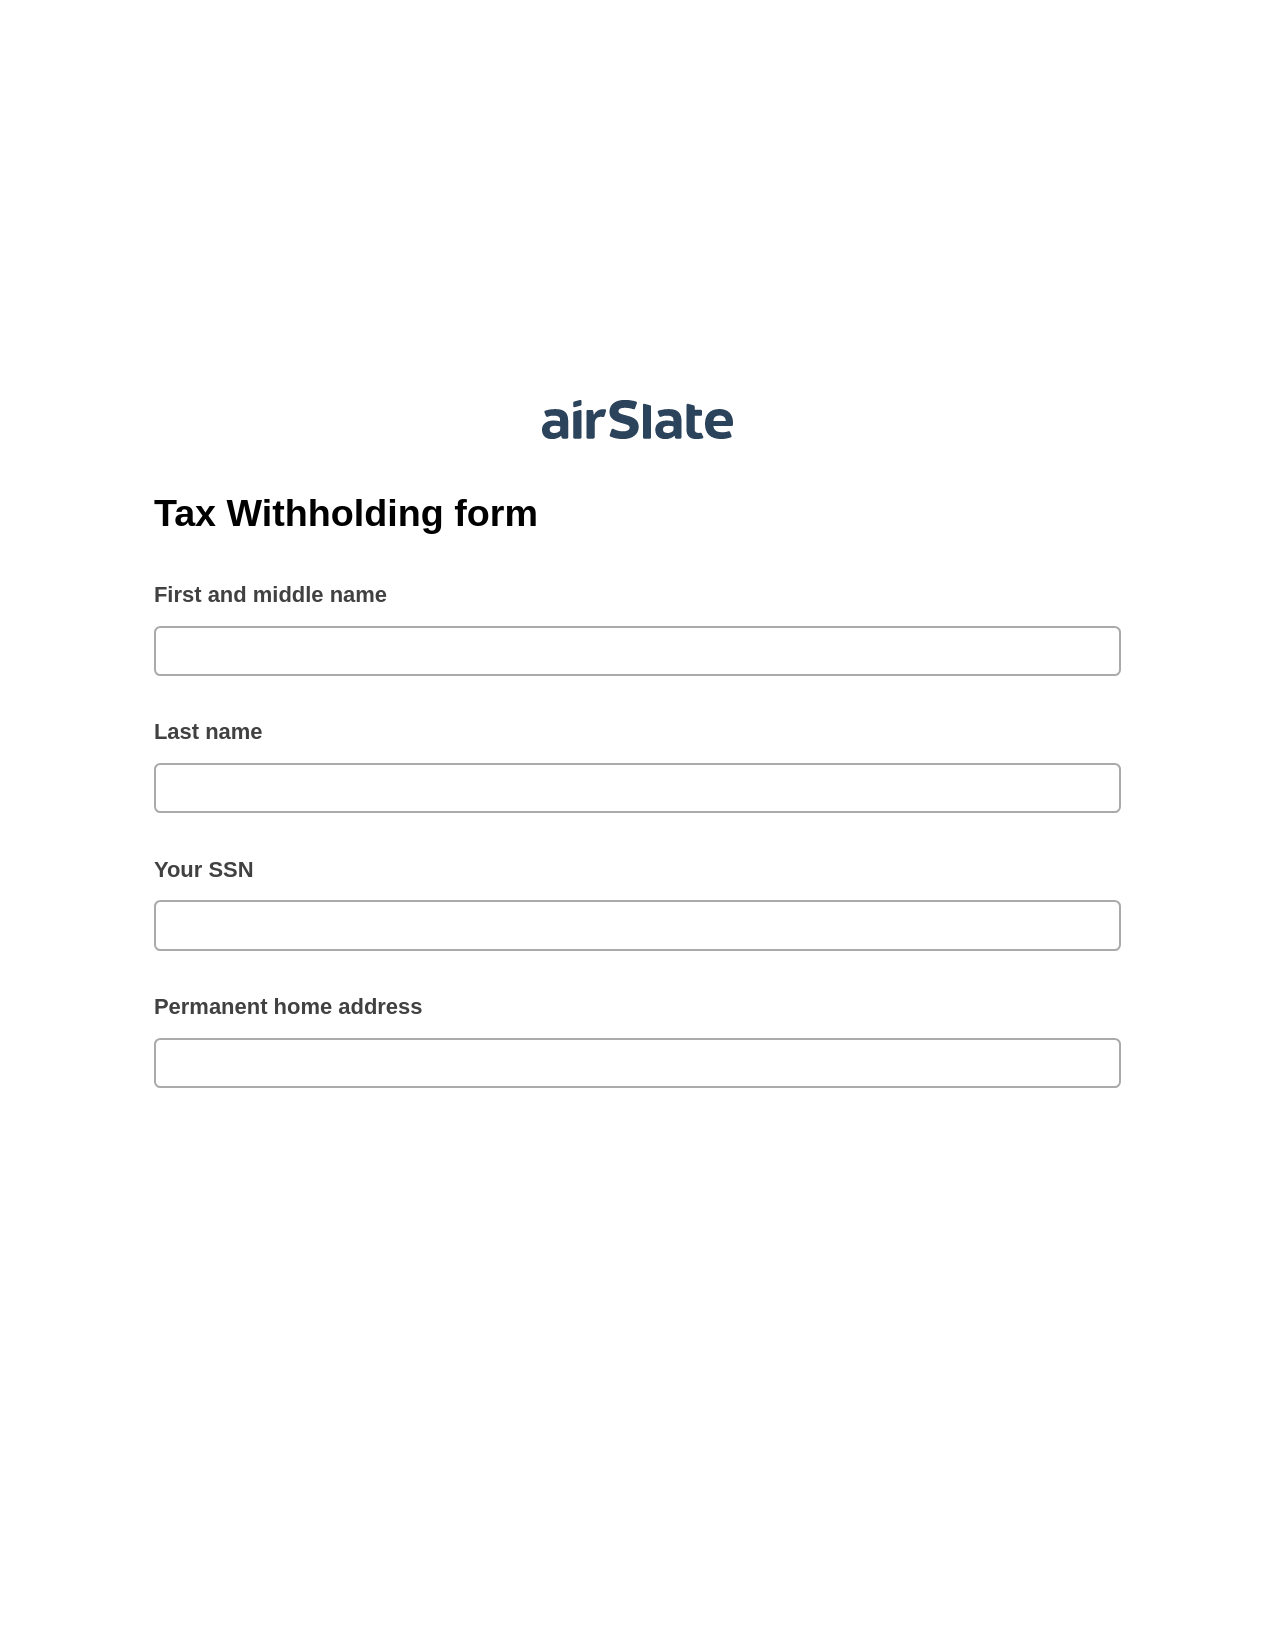 Multirole Tax Withholding form Pre-fill from Salesforce Records via SOQL Bot, Webhook Bot, Export to Formstack Documents Bot